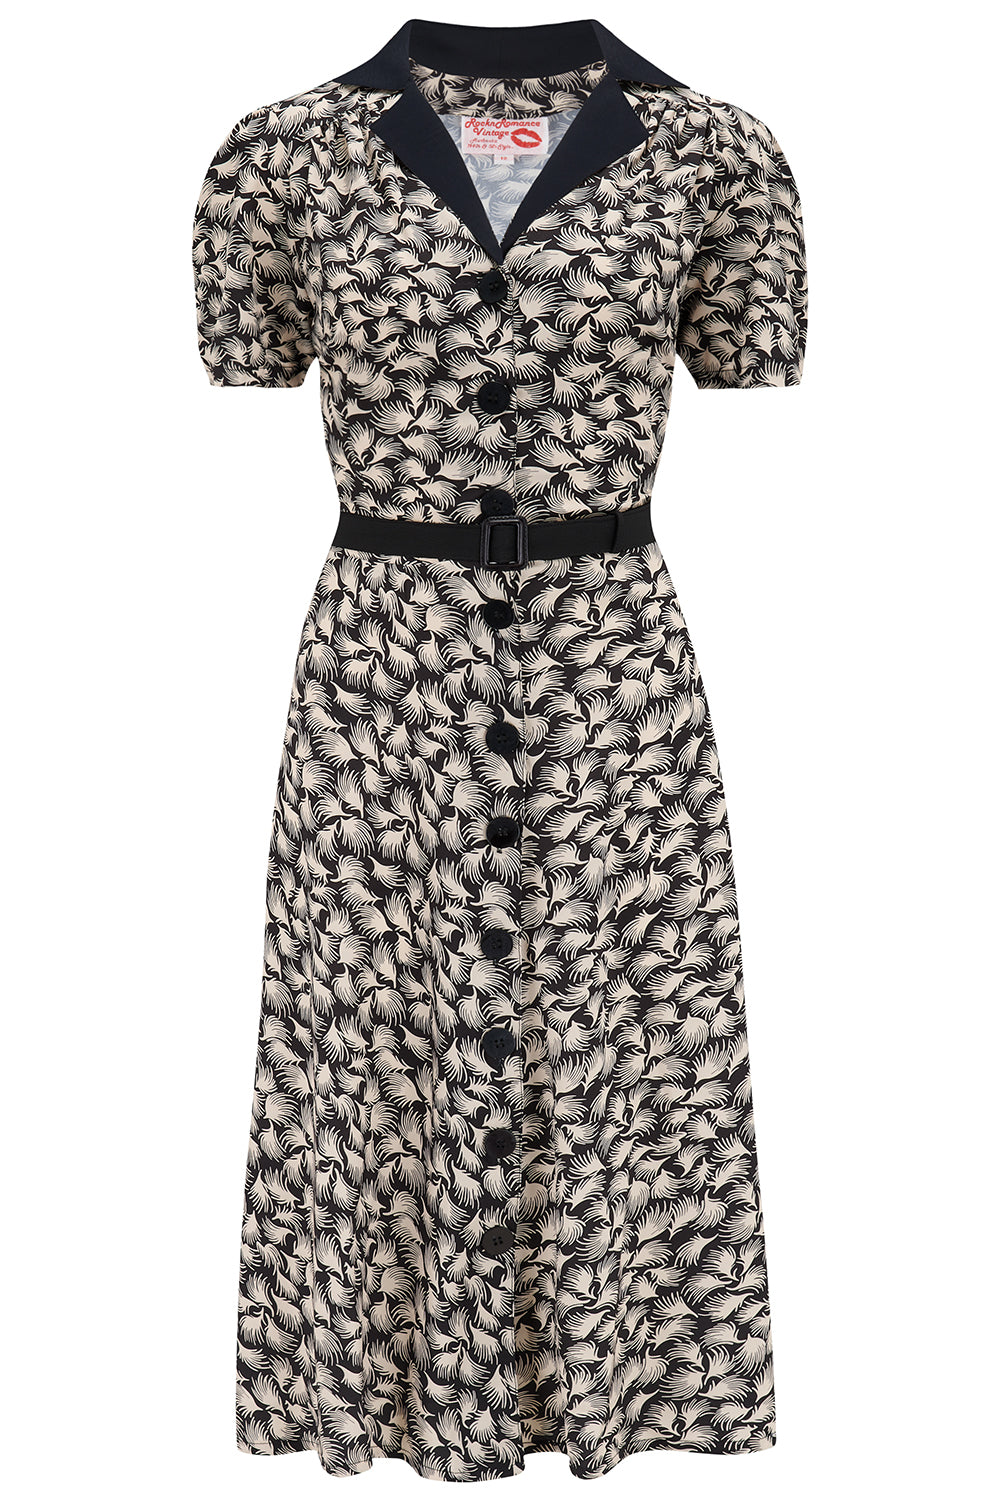 1940s Day Dress Styles, House Dresses The Charlene Shirtwaister Dress in Black Whisp Print With Contrast Collar True 1950s Vintage Style £49.95 AT vintagedancer.com